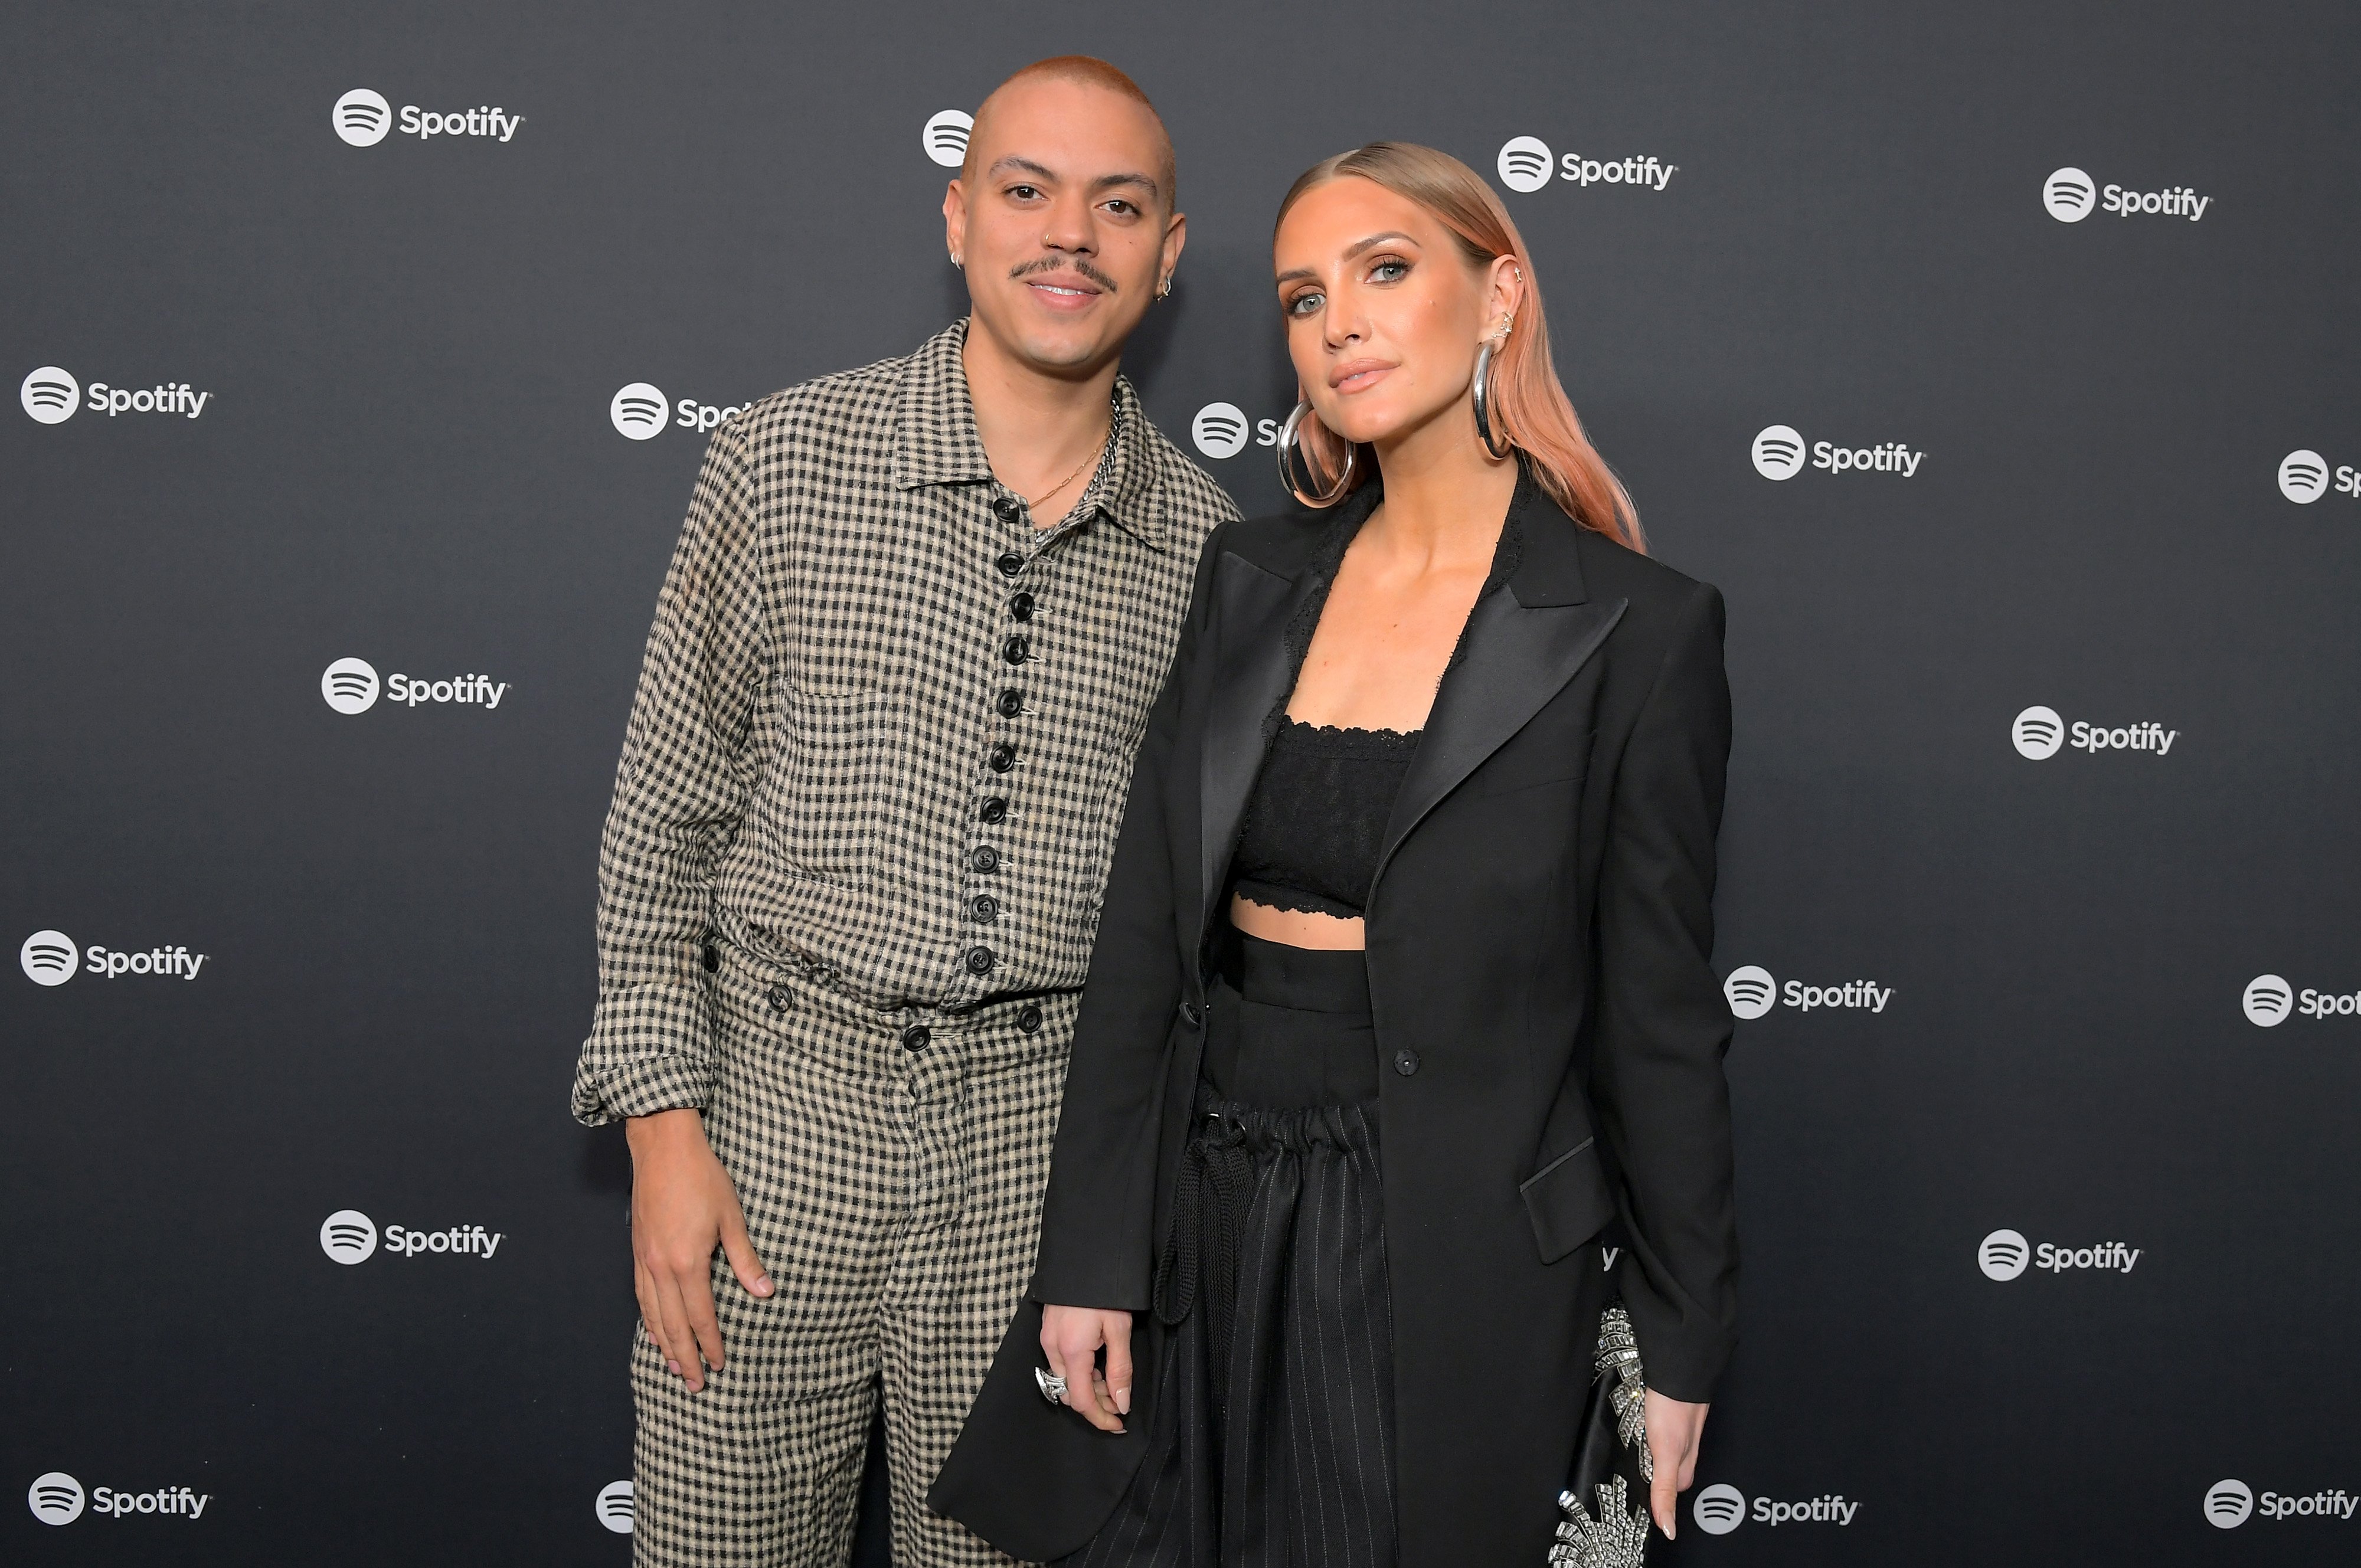 Evan Ross and Ashlee Simpson attend Spotify Hosts "Best New Artist" Party on January 23, 2020, in Los Angeles, California. | Source: Getty Images.